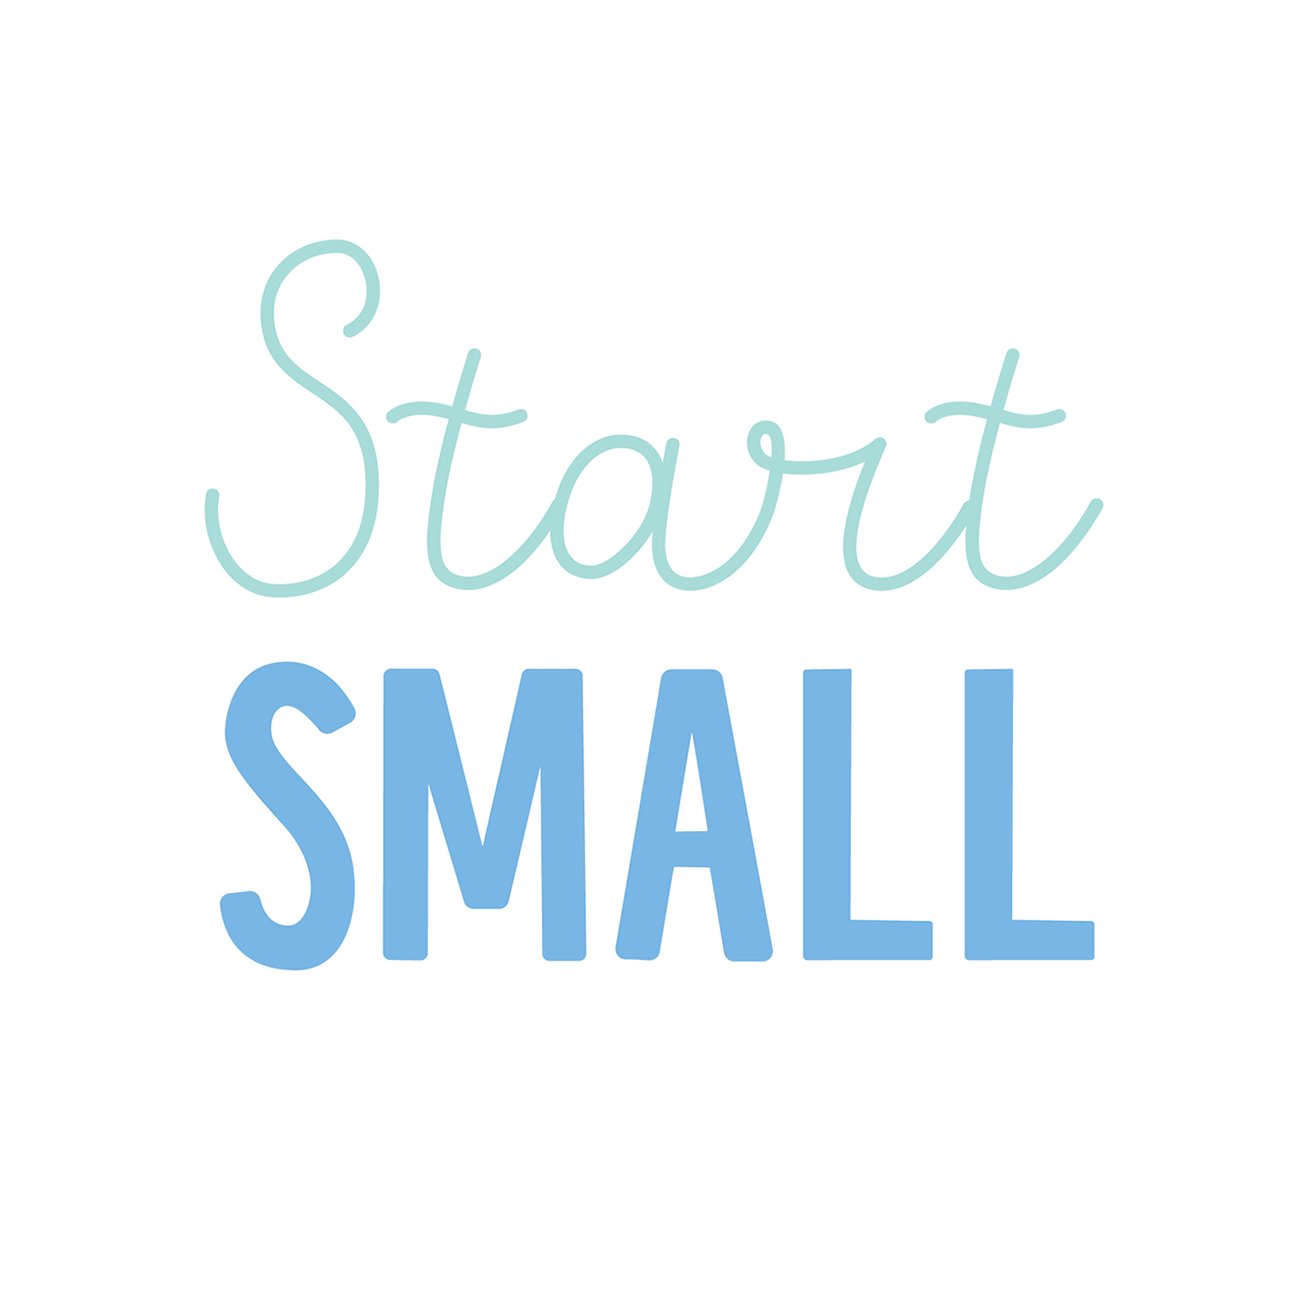 Start Small, Part 4: Small Pause